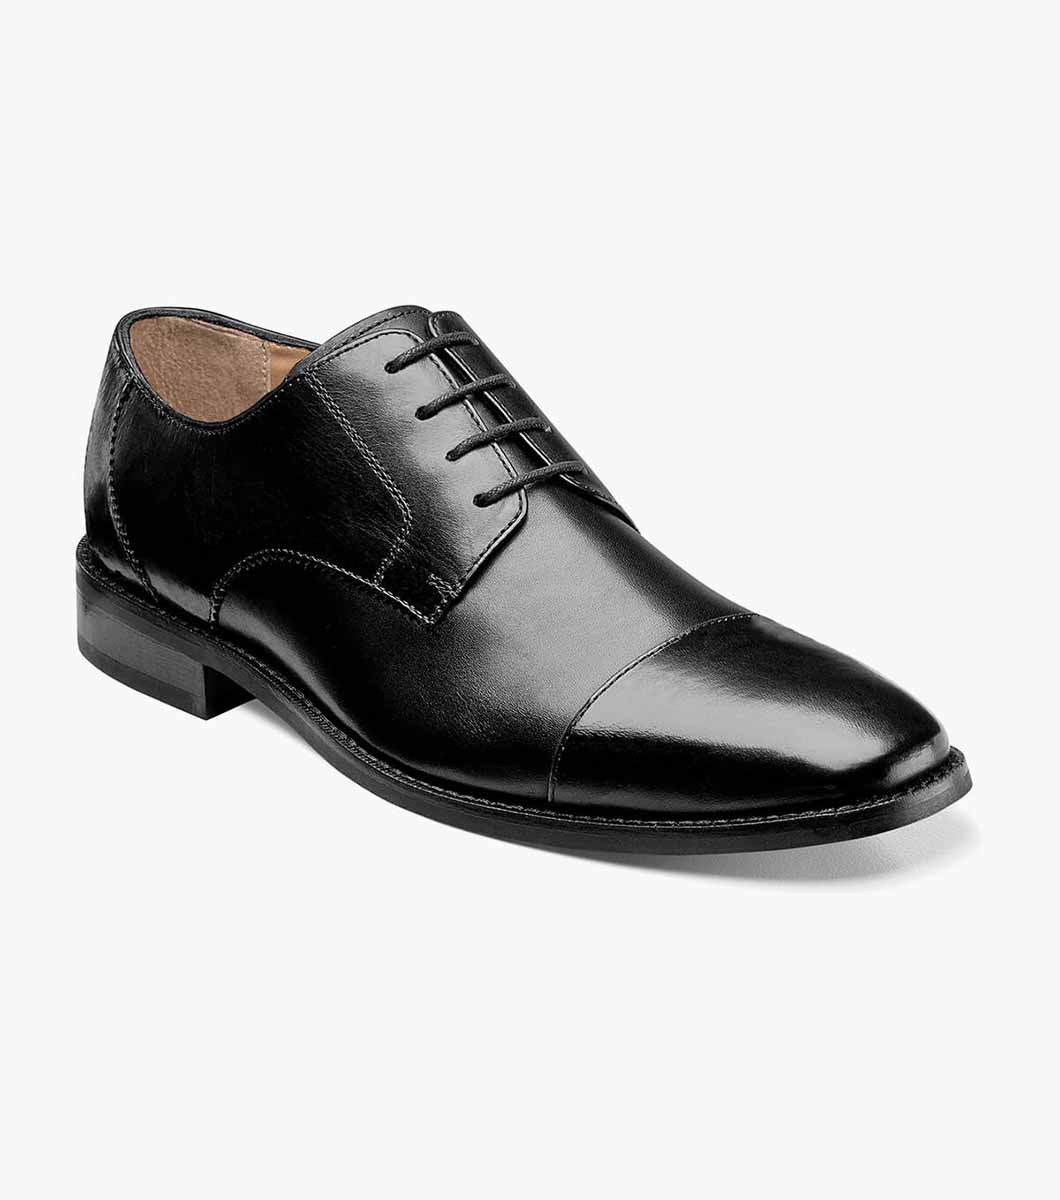 florsheim shoes black and white